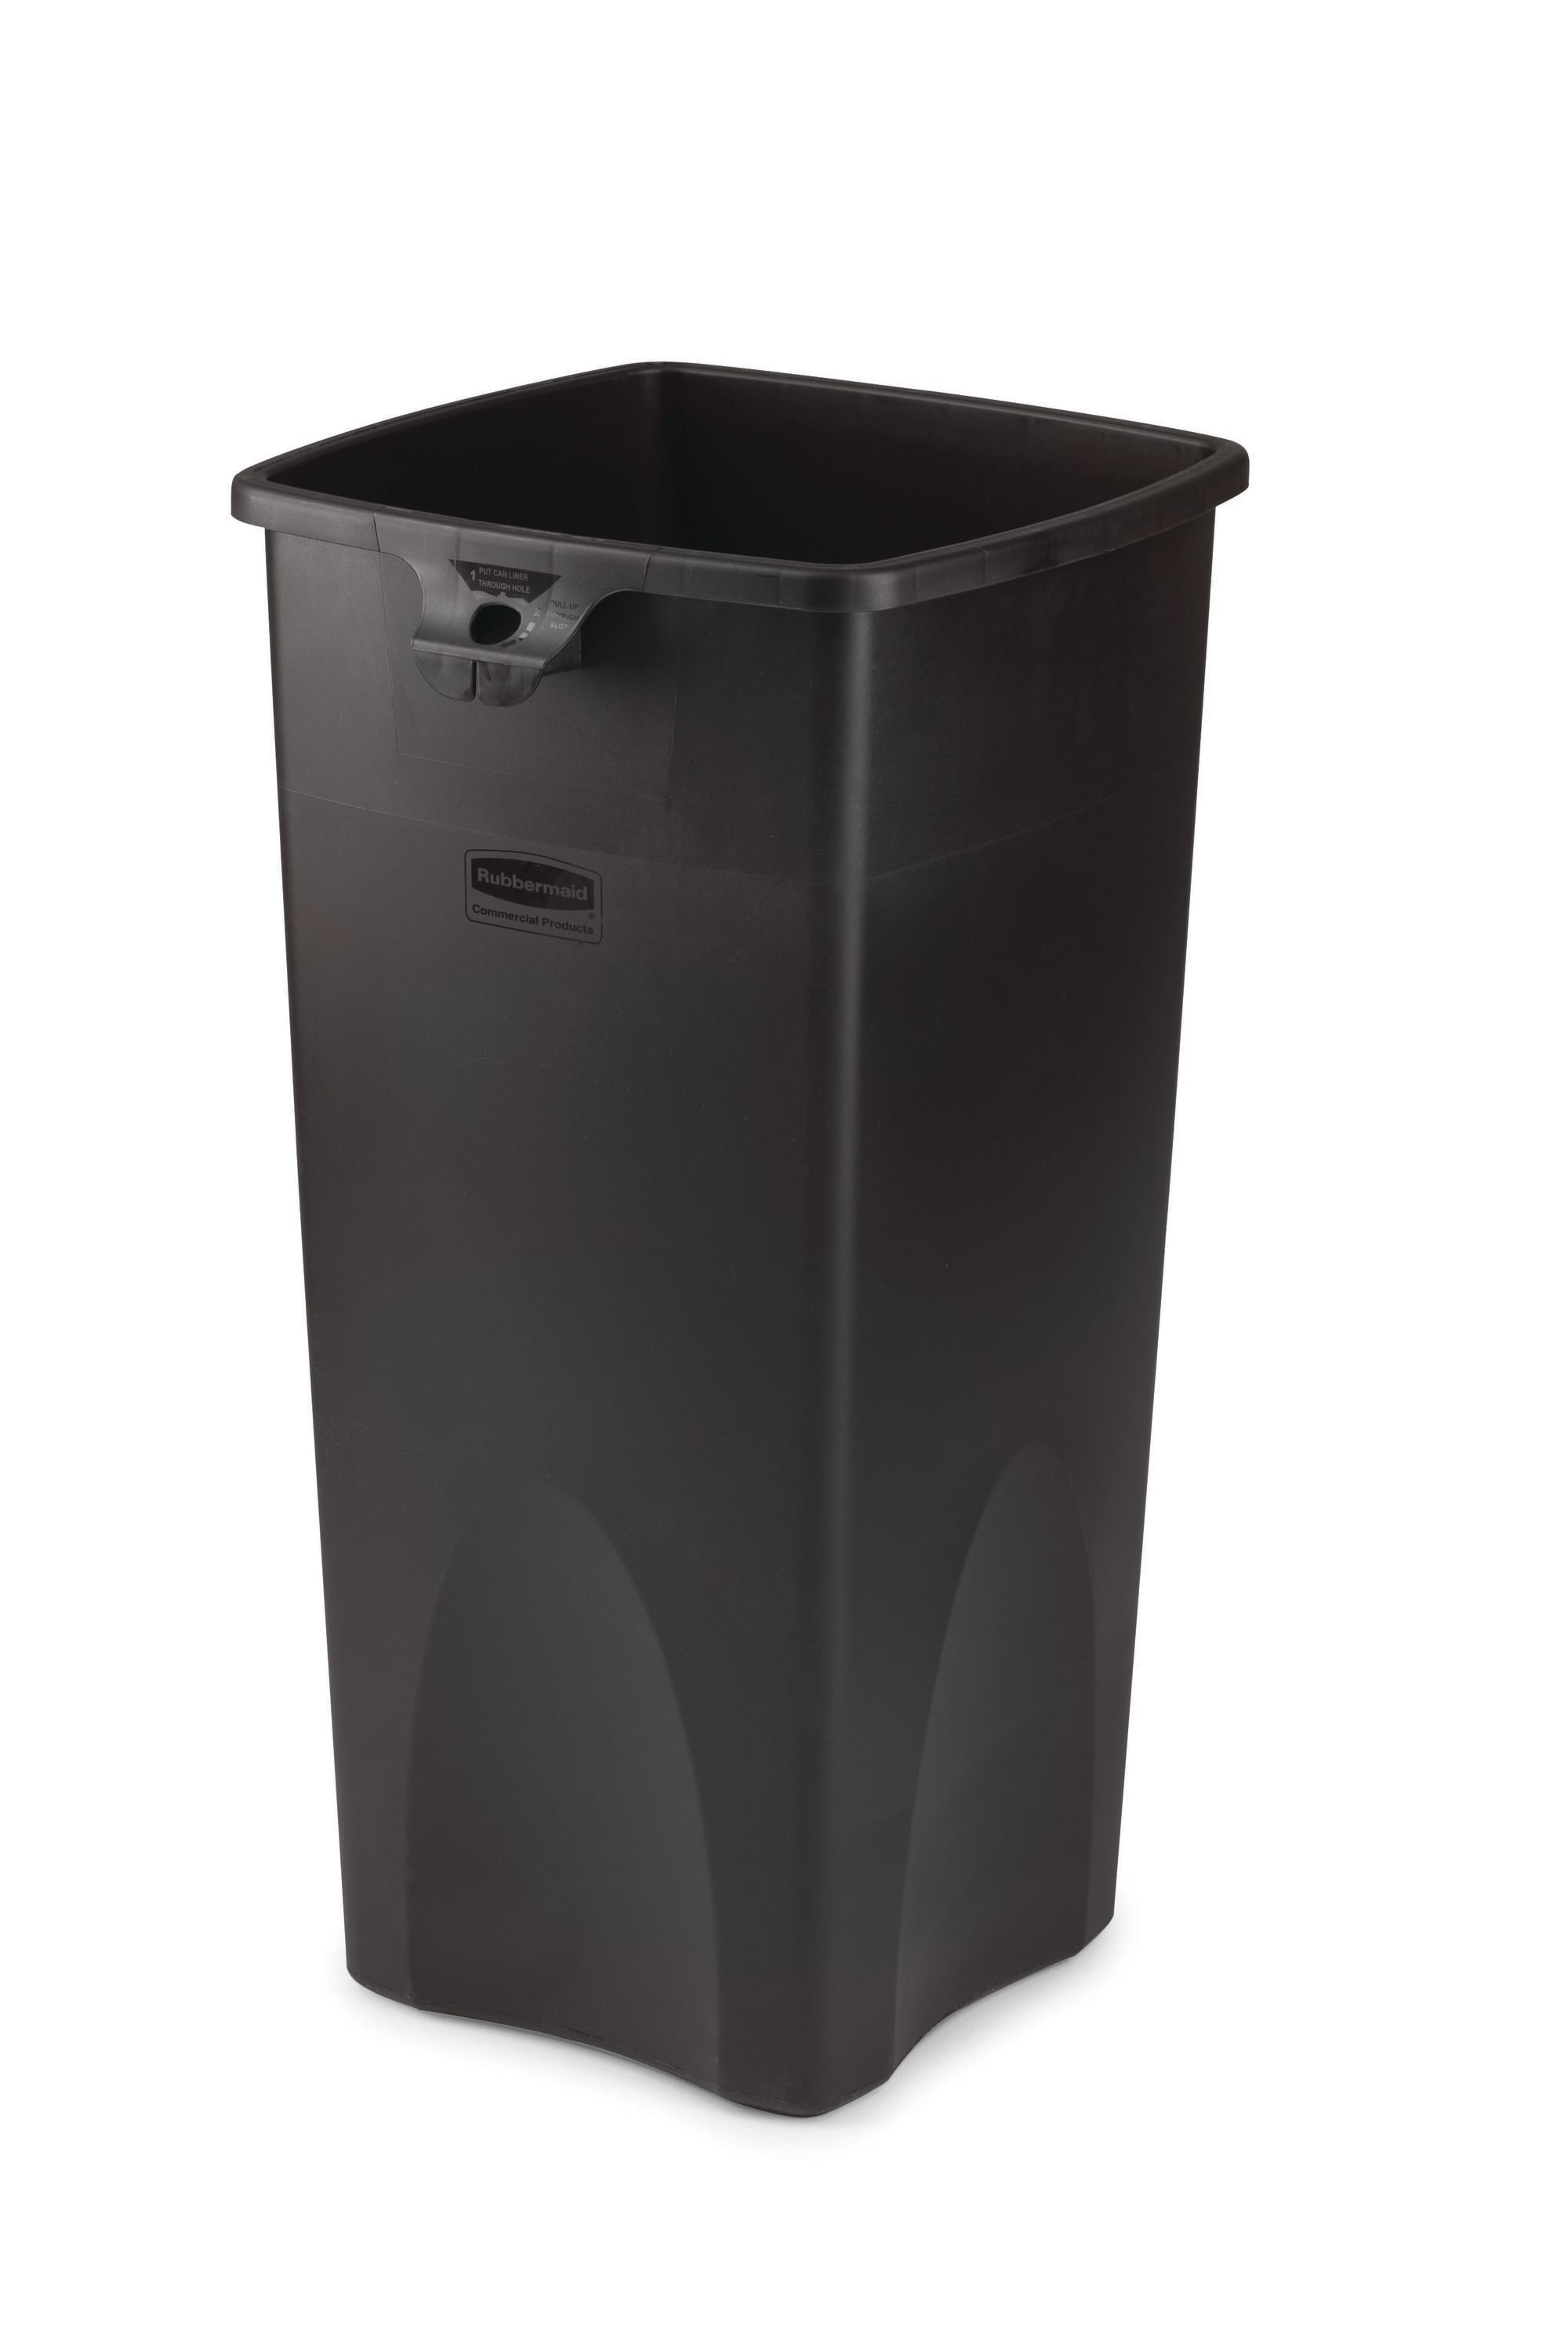 Project Source 23- Gallons Black Plastic Touchless Kitchen Trash Can Indoor